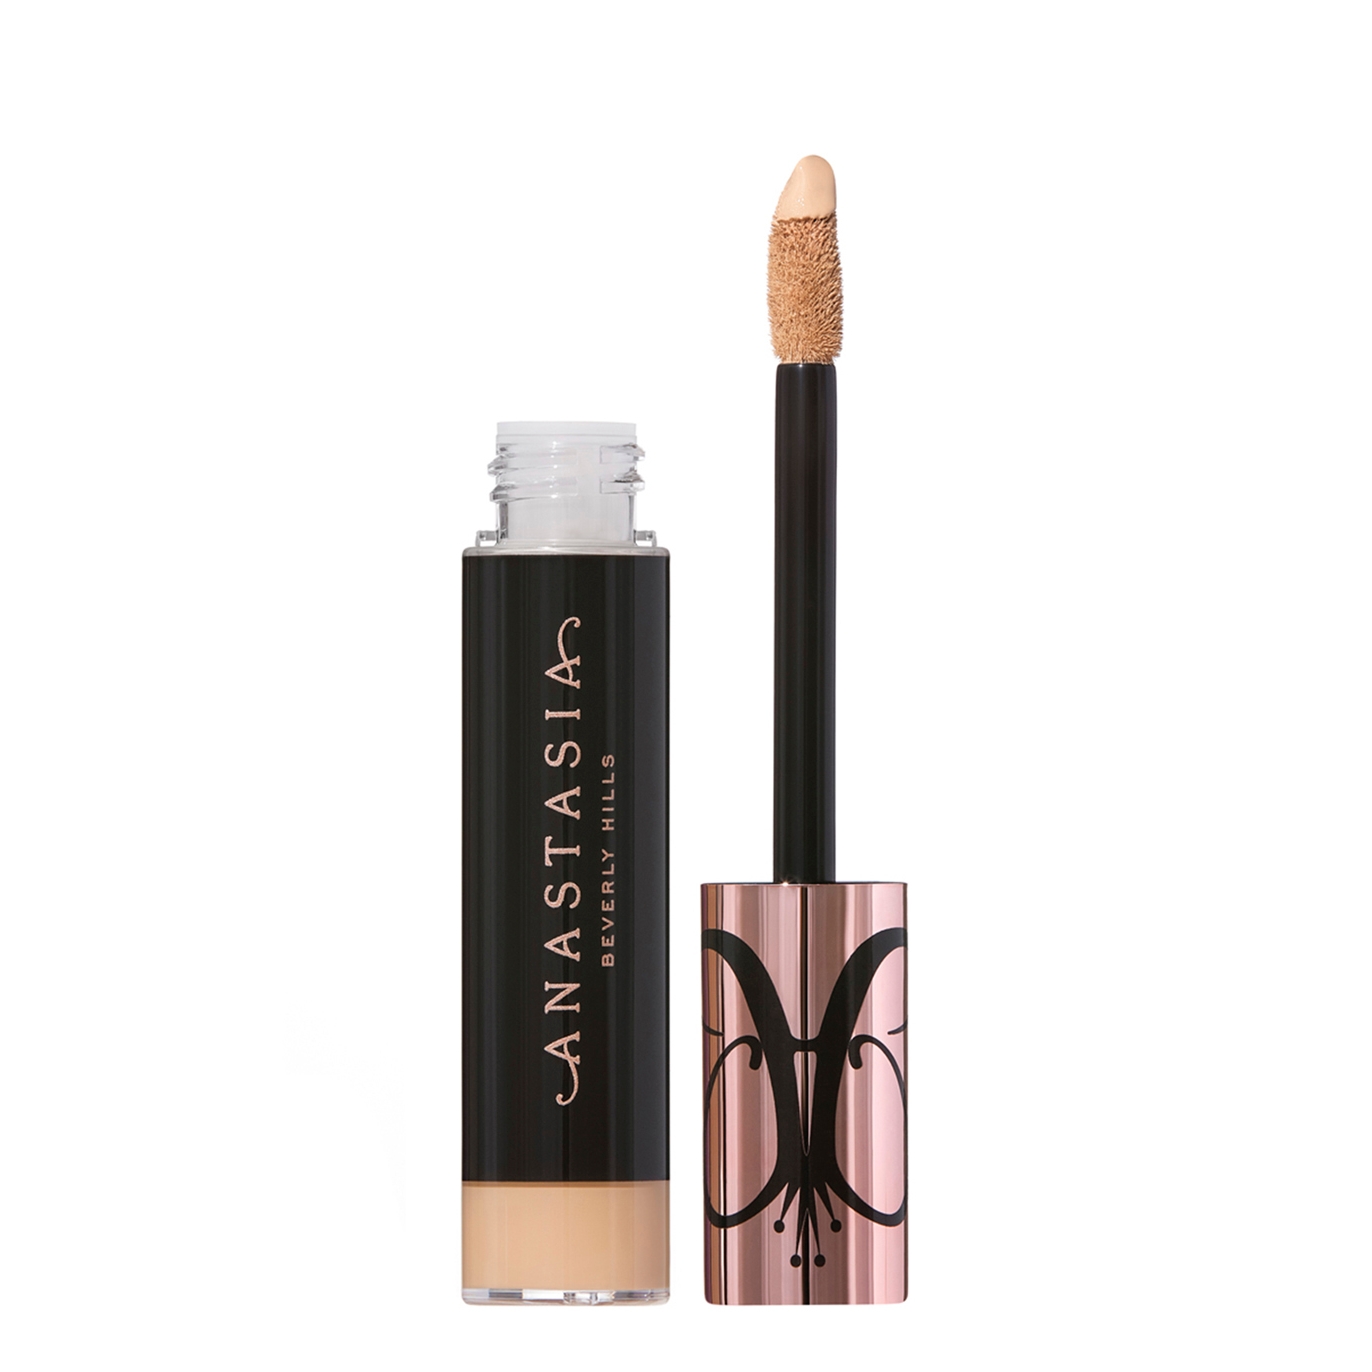 Anastasia Beverly Hills Magic Touch Concealer - Colour 13